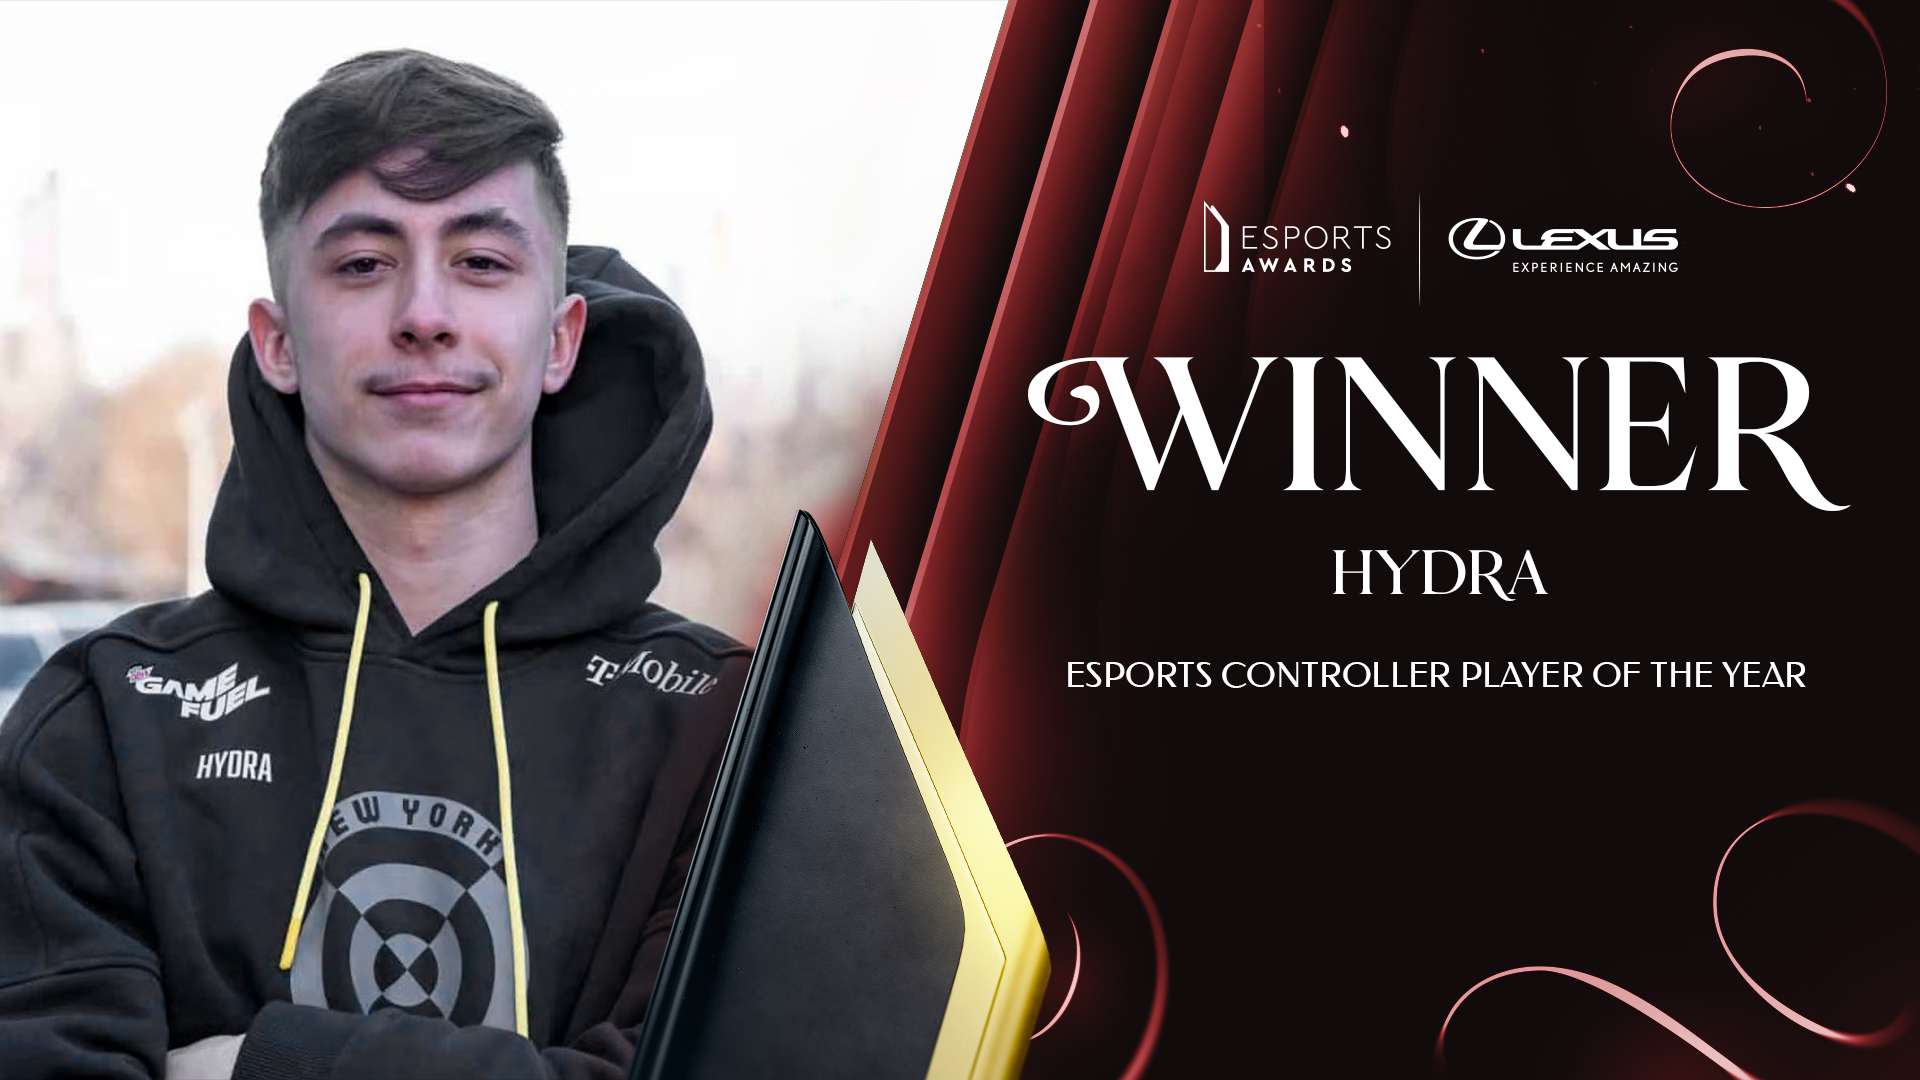 Esports Controller Player of the Year thuộc về HyDra.